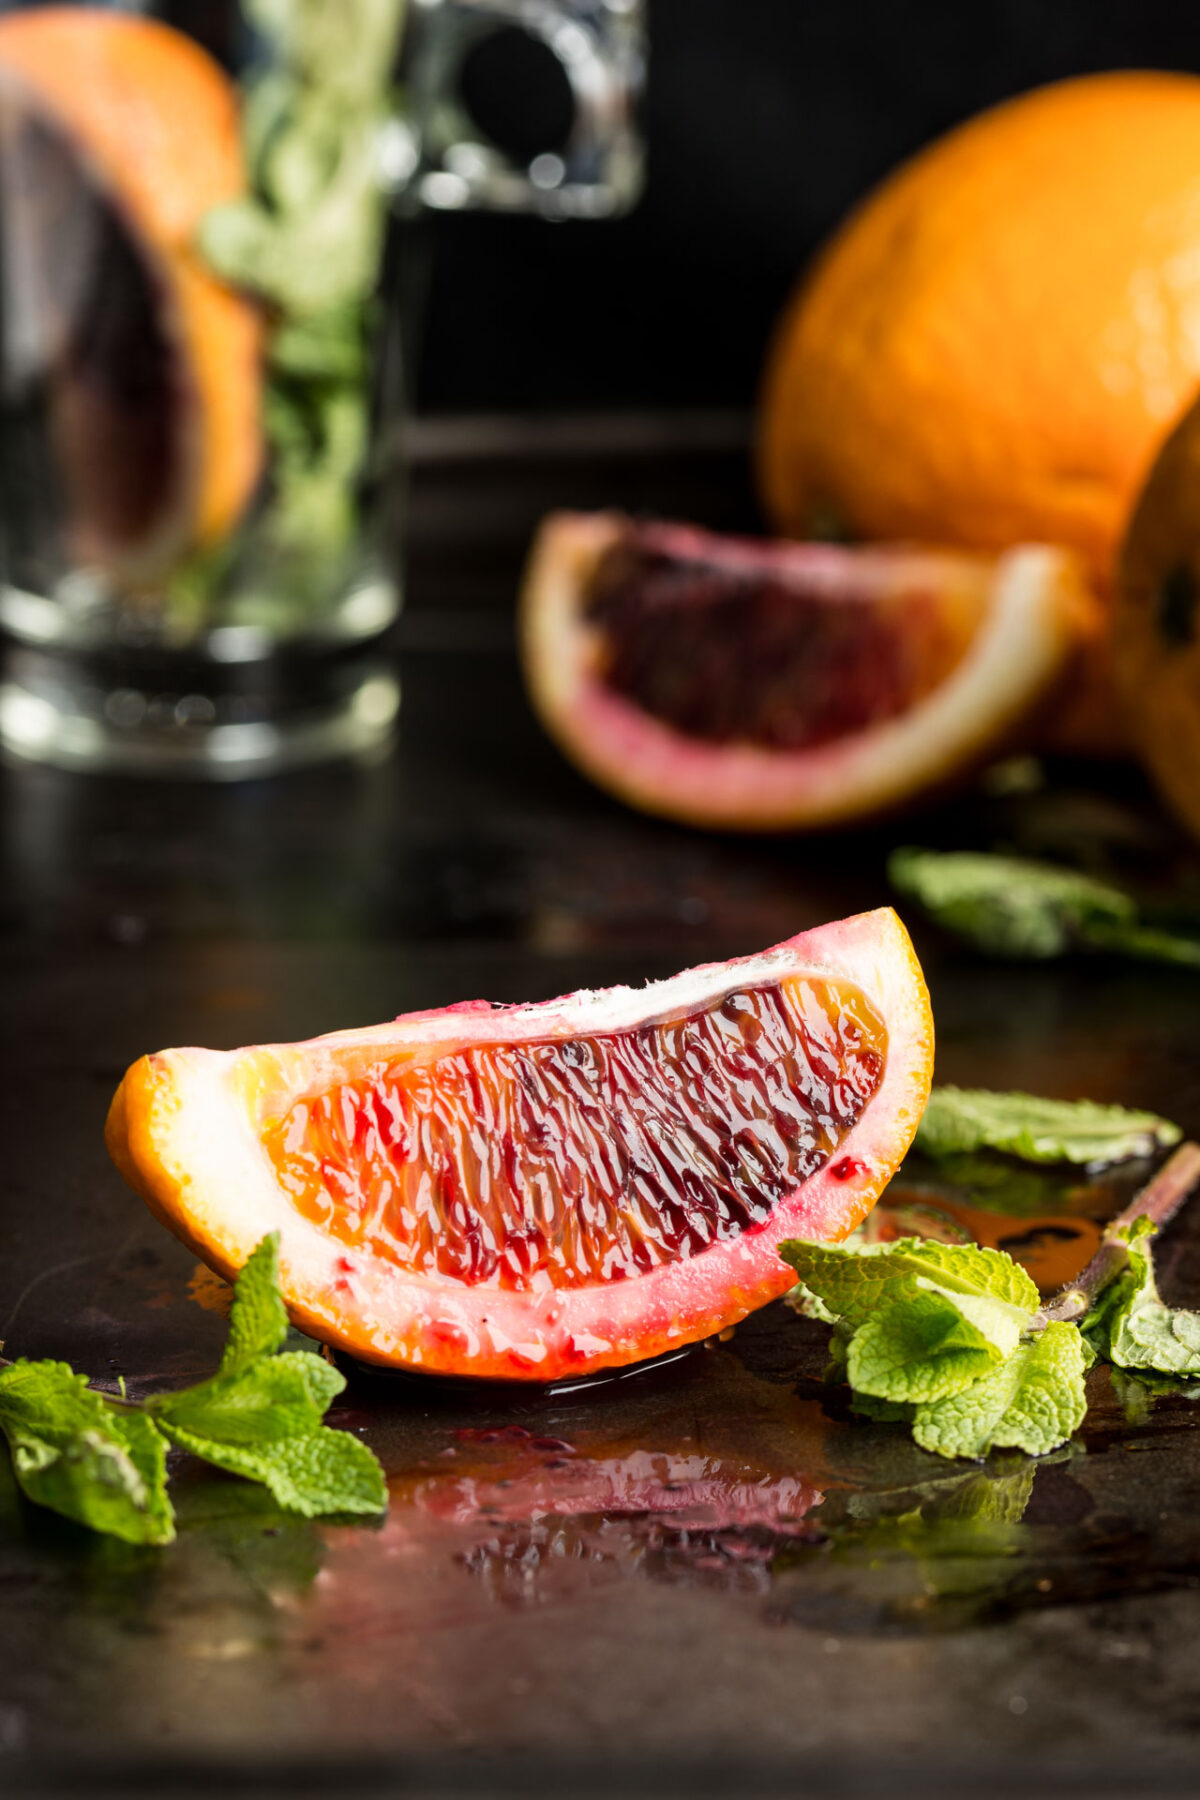 A slice of blood orange on a table surrounded by sprigs of fresh mint.